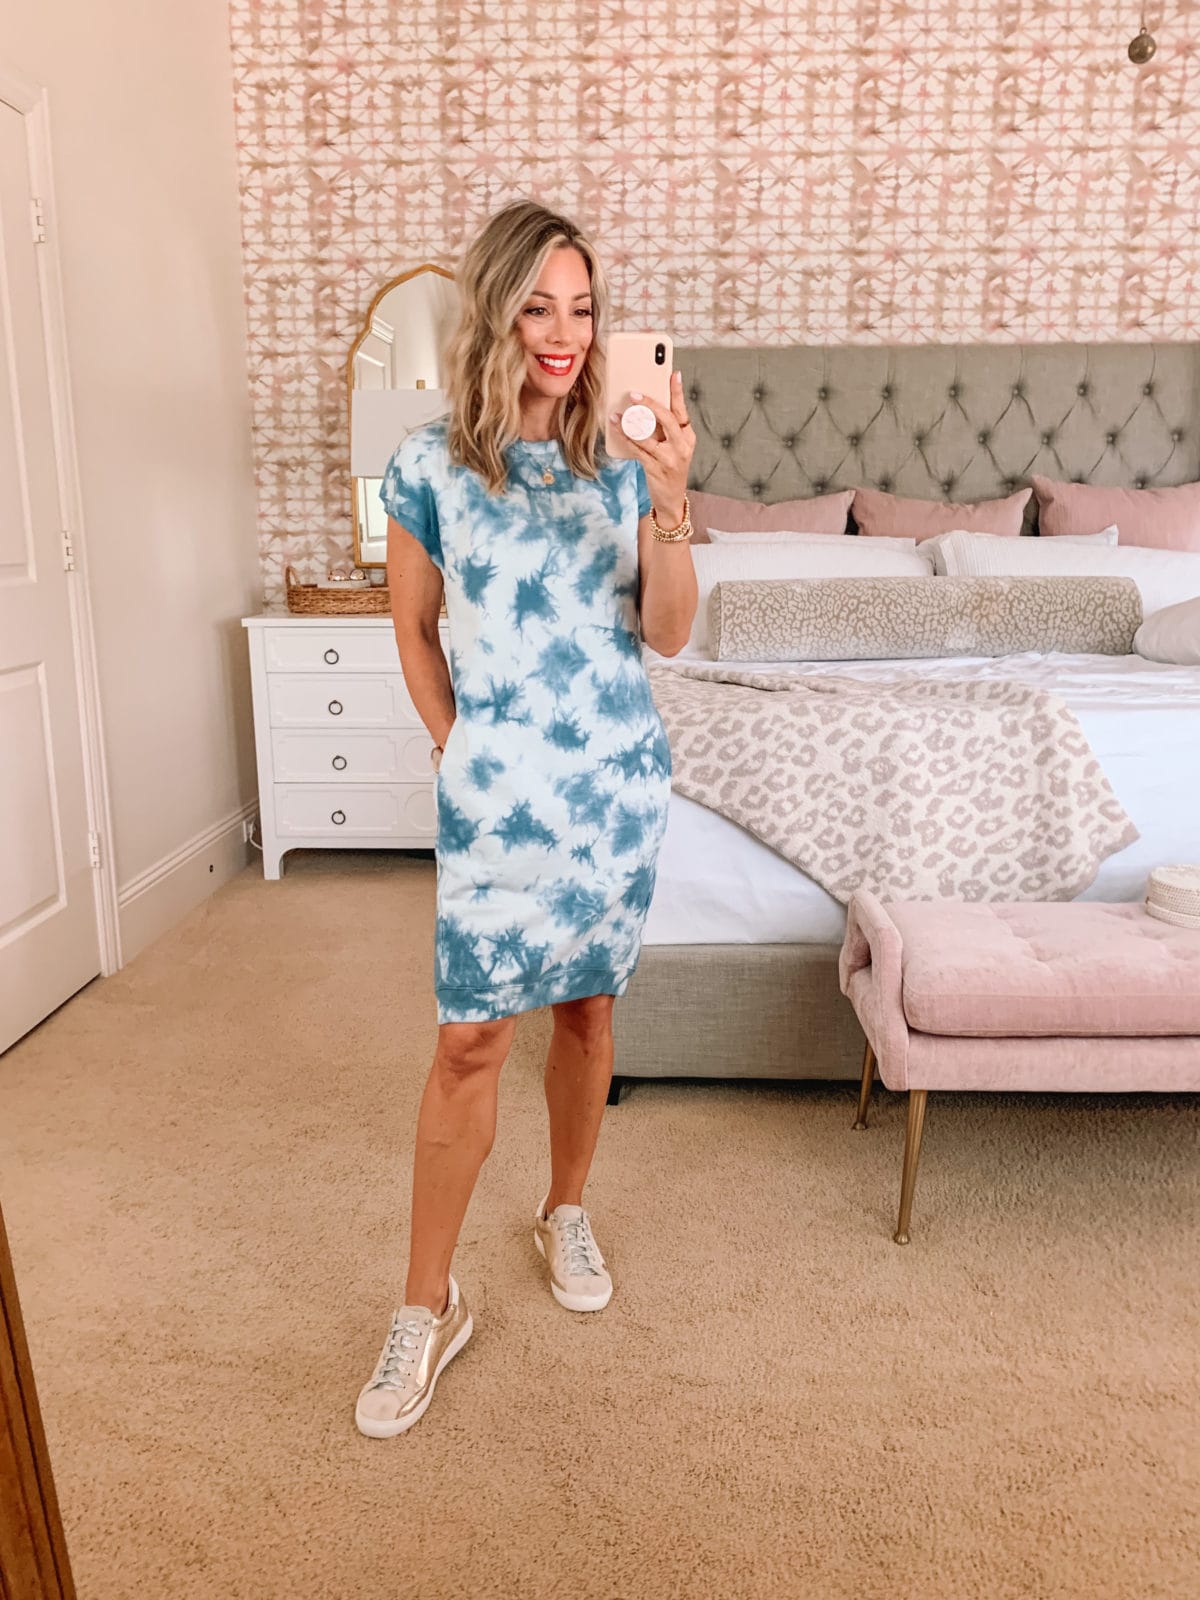 Amazon Fashion Faves, Tie Dye Dress and Sneakers 